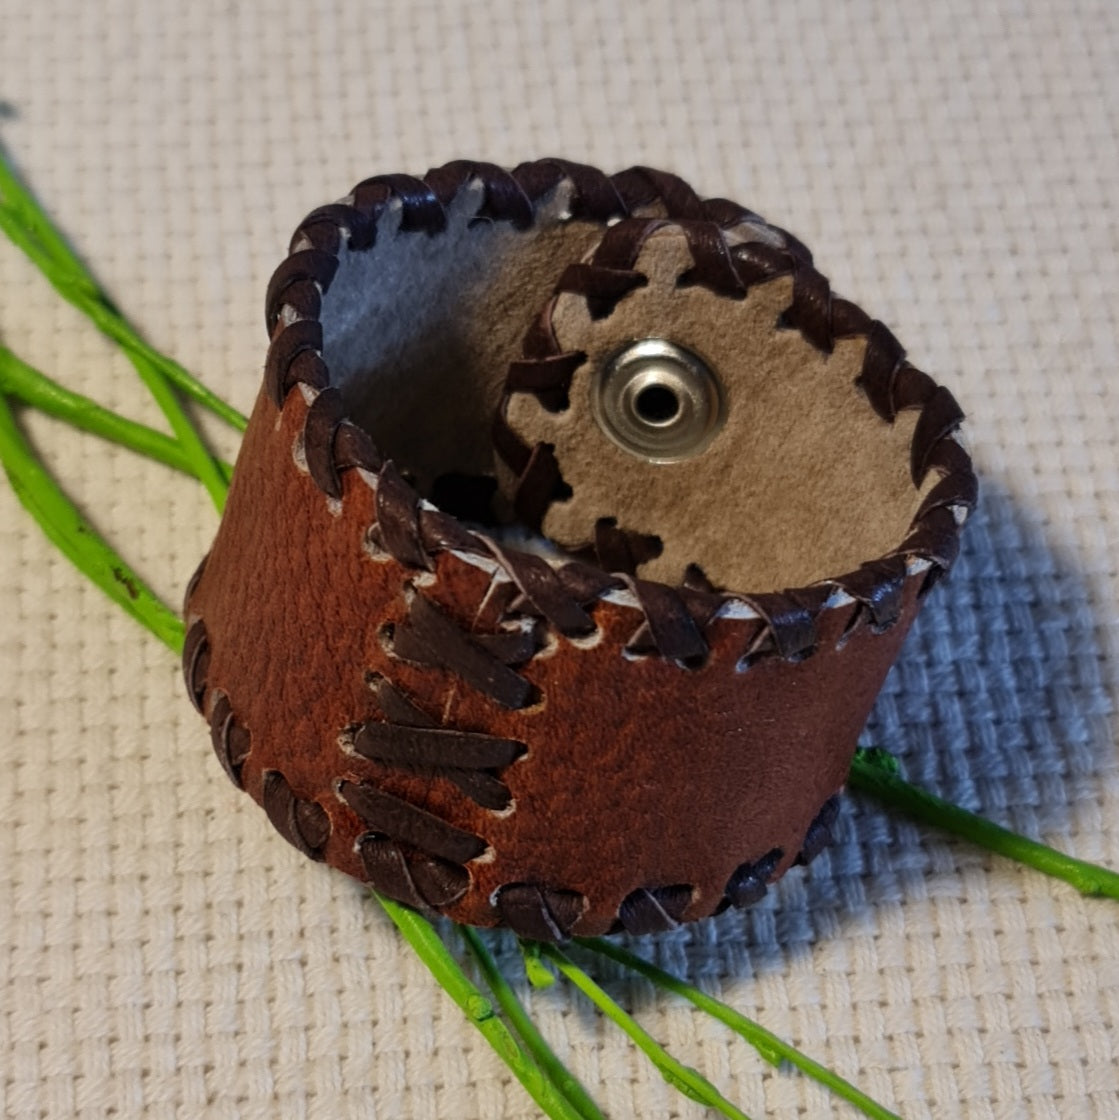 Band-shaped leather bracelet in brown color with dark brown cross-stitched decorative elements and push-button closure (JŠČ)